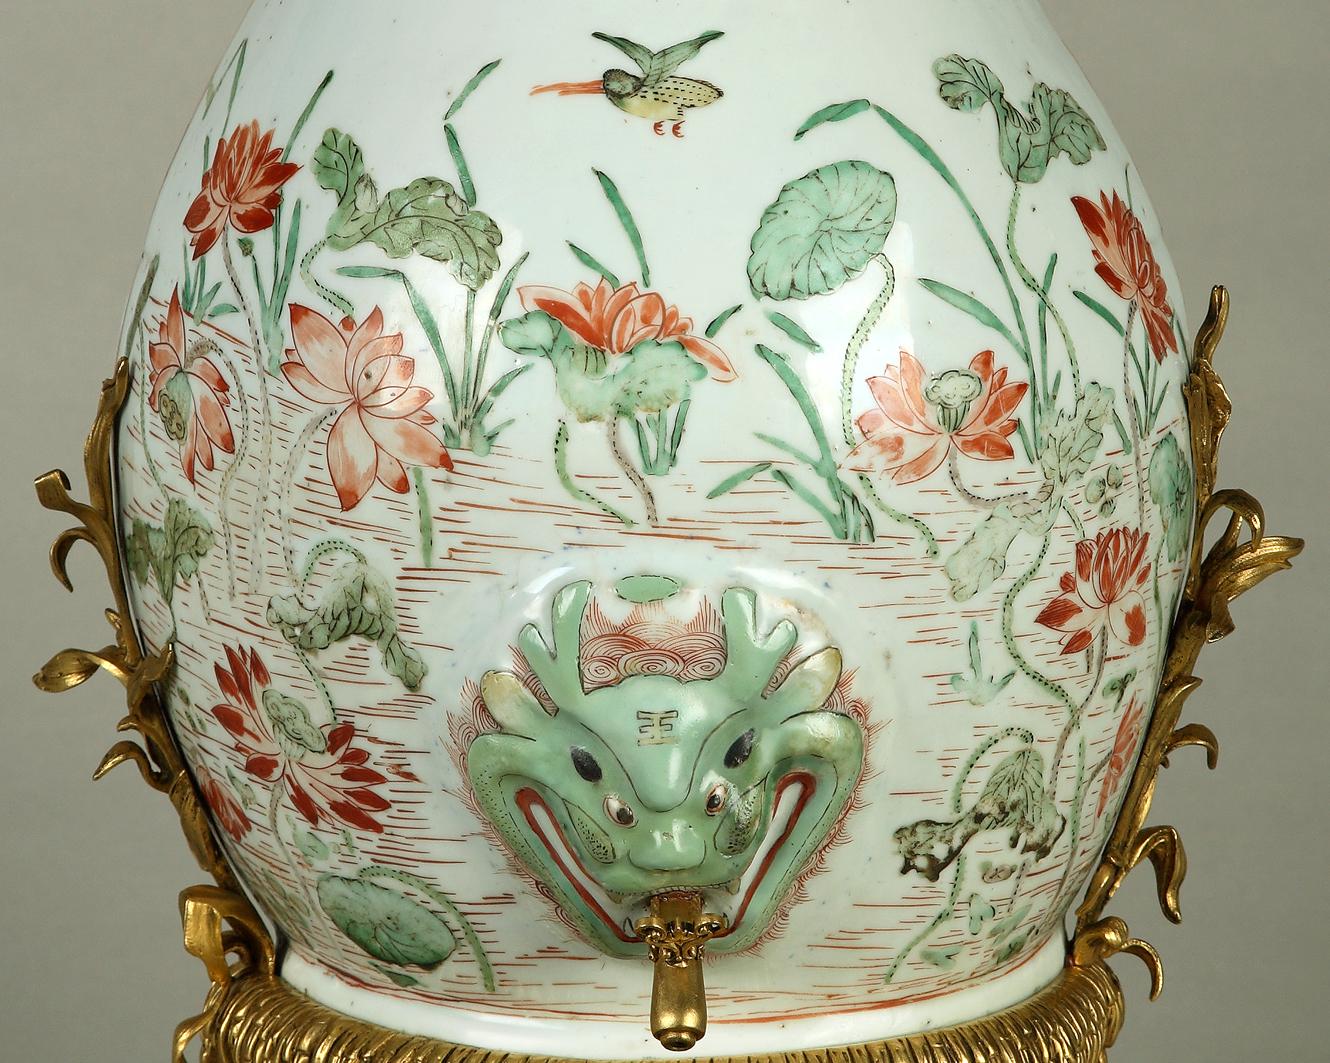 Chinoiserie Chinese Porcelain Mural Fountain Attributed to L'Escalier de Cristal, c. 1880 For Sale